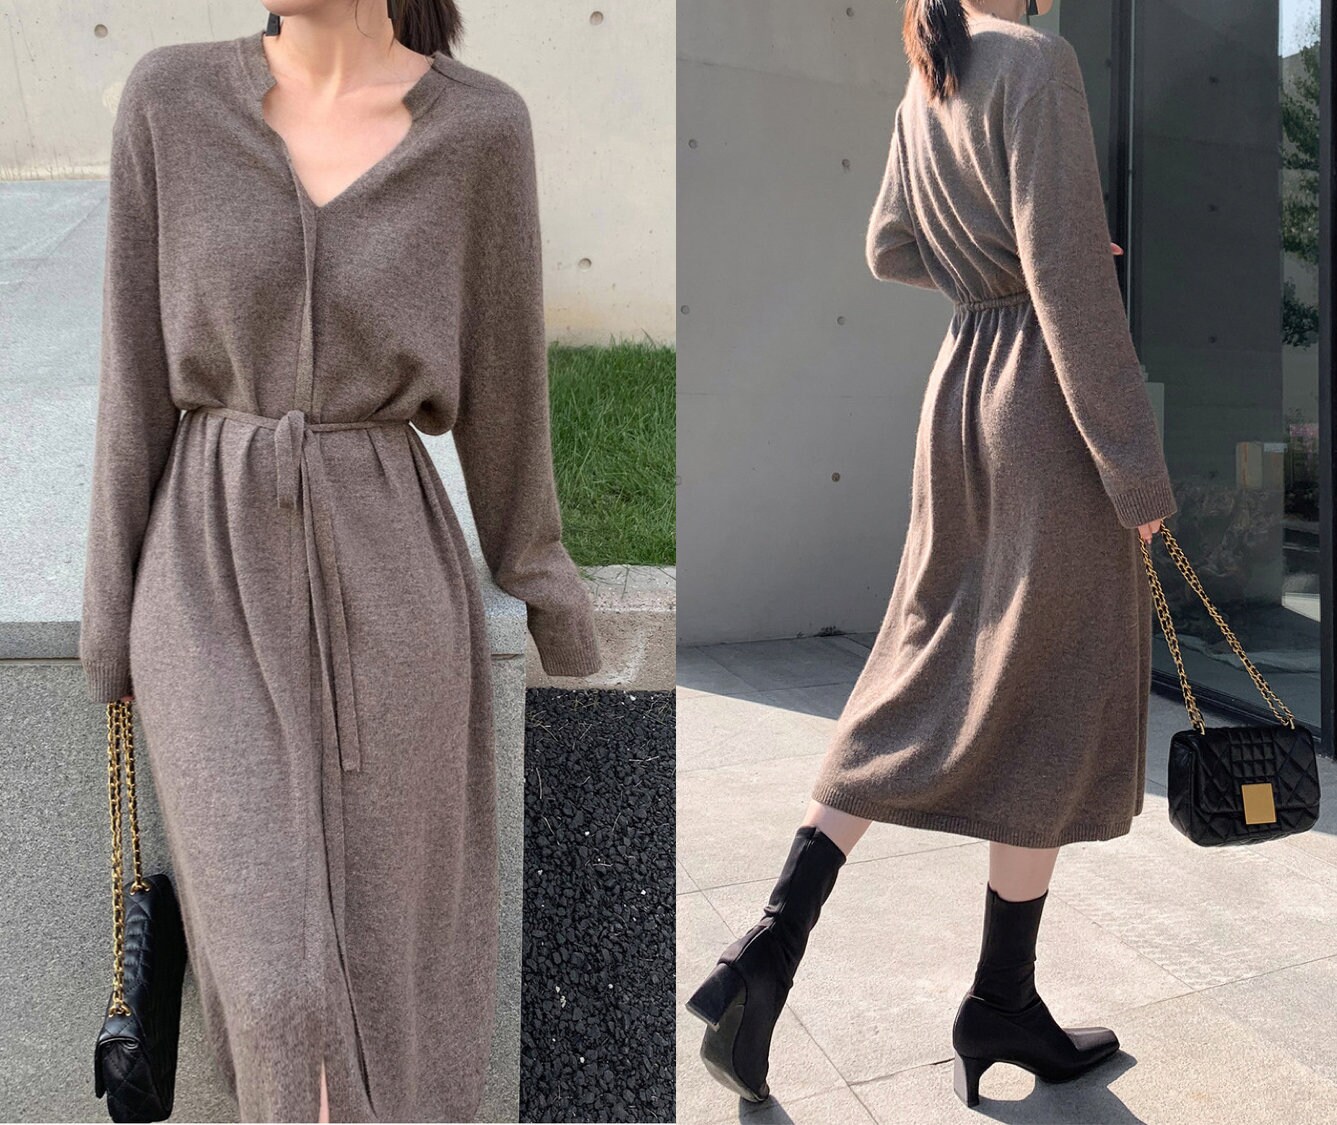 Women Knitted Cashmere/Cotton Blend Long Sleeve V-Neck Dress With Belt Very Soft & Comfortable Crus Length